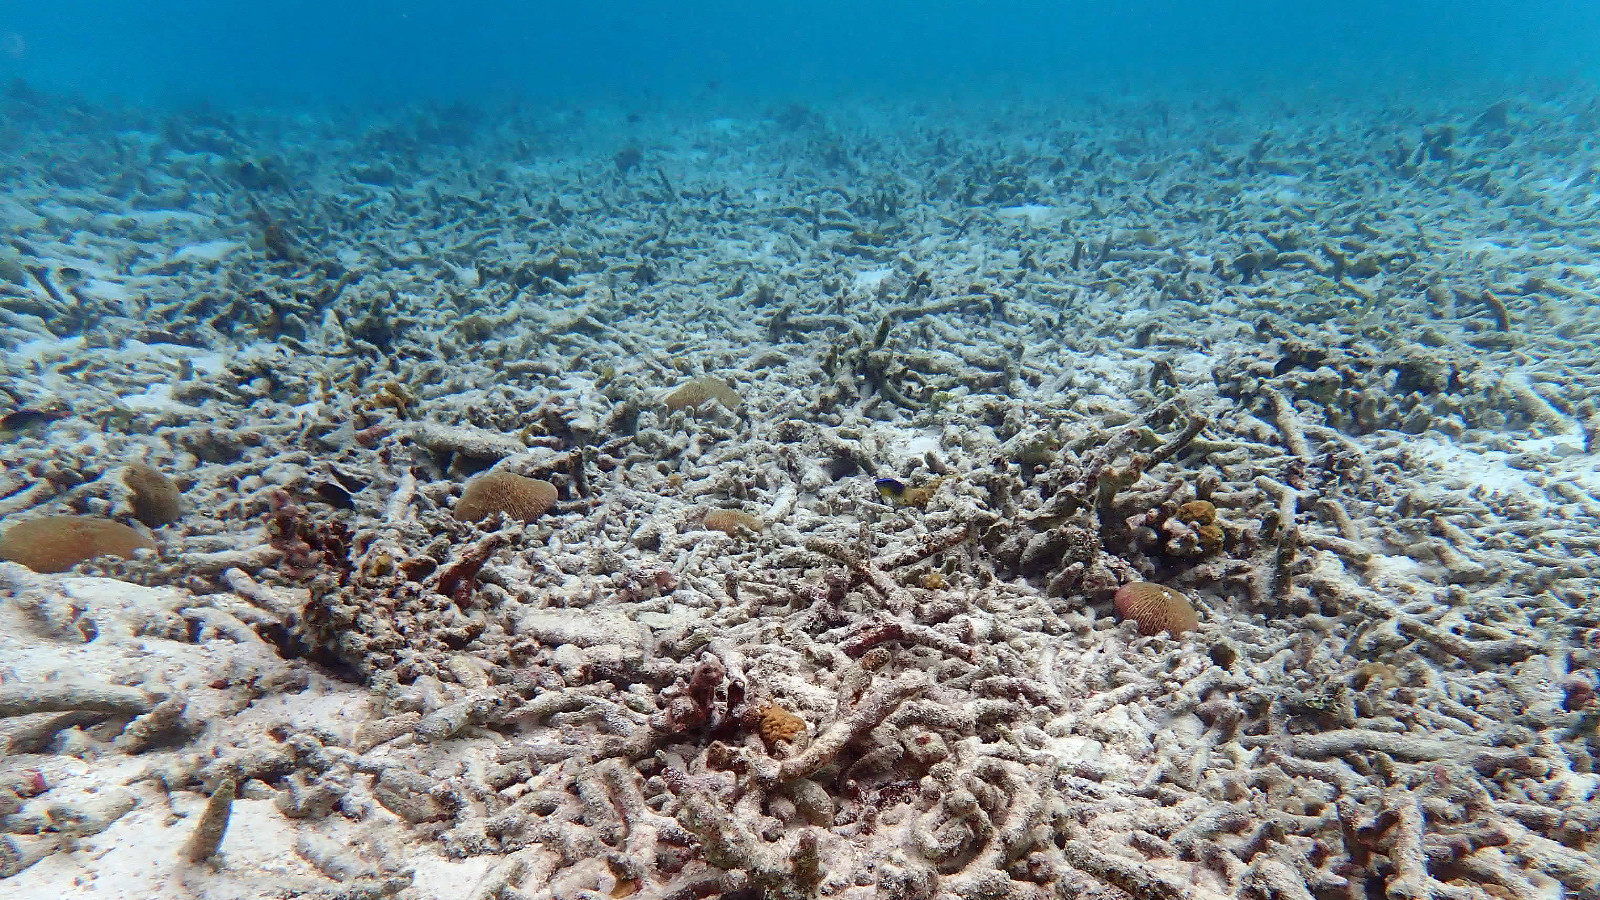 photo of Have the world’s coral reefs already crossed a tipping point? image